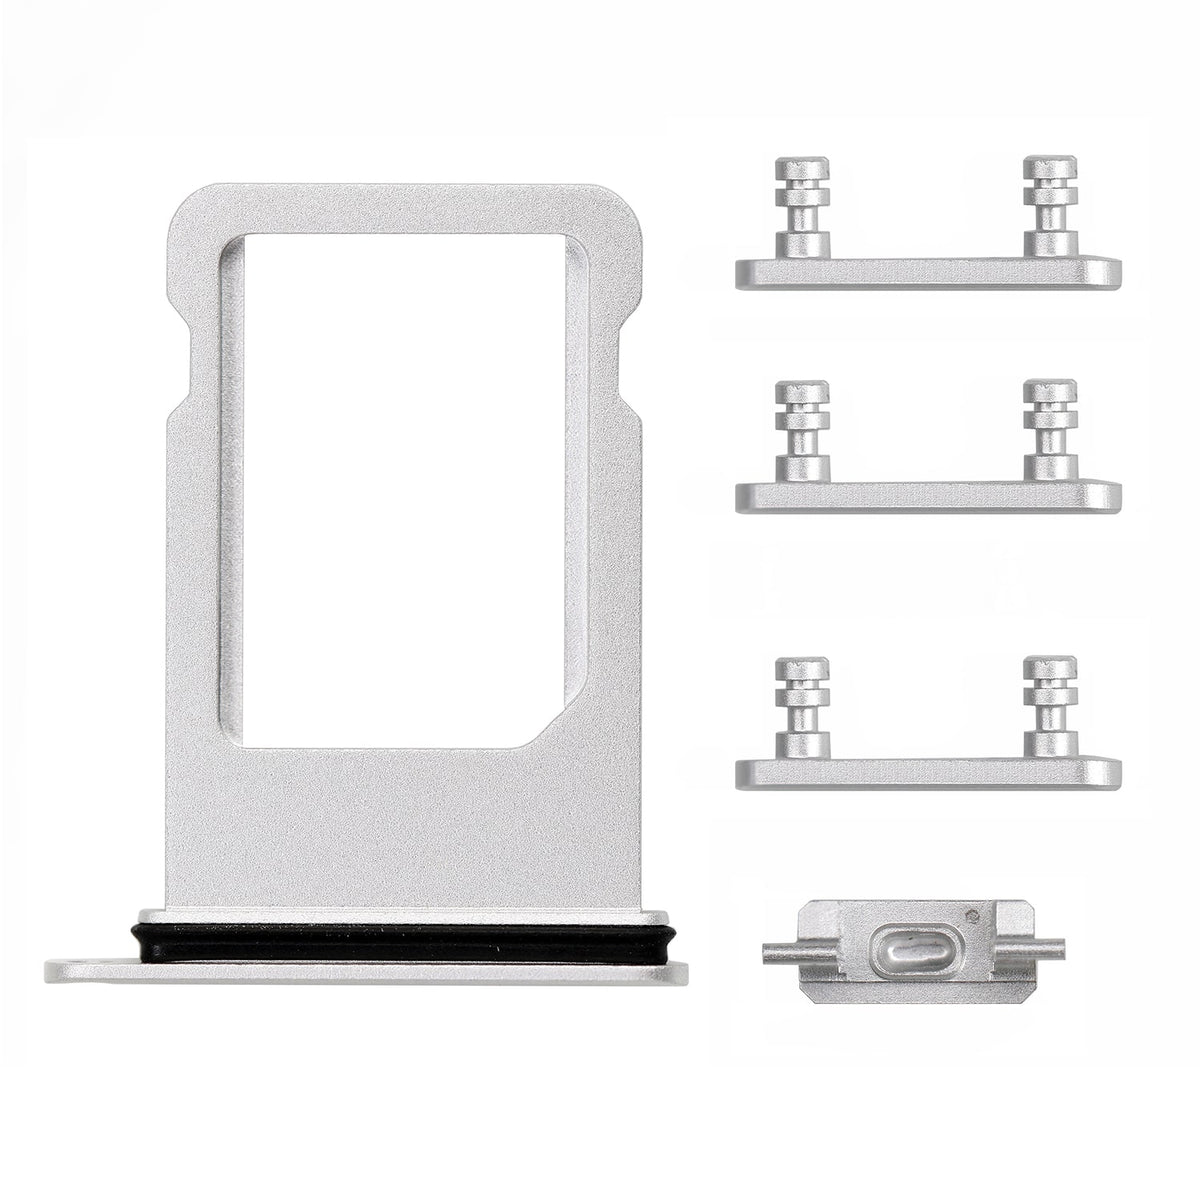 SILVER SIDE BUTTONS SET WITH SIM TRAY FOR IPHONE 8/SE 2ND/SE 3RD